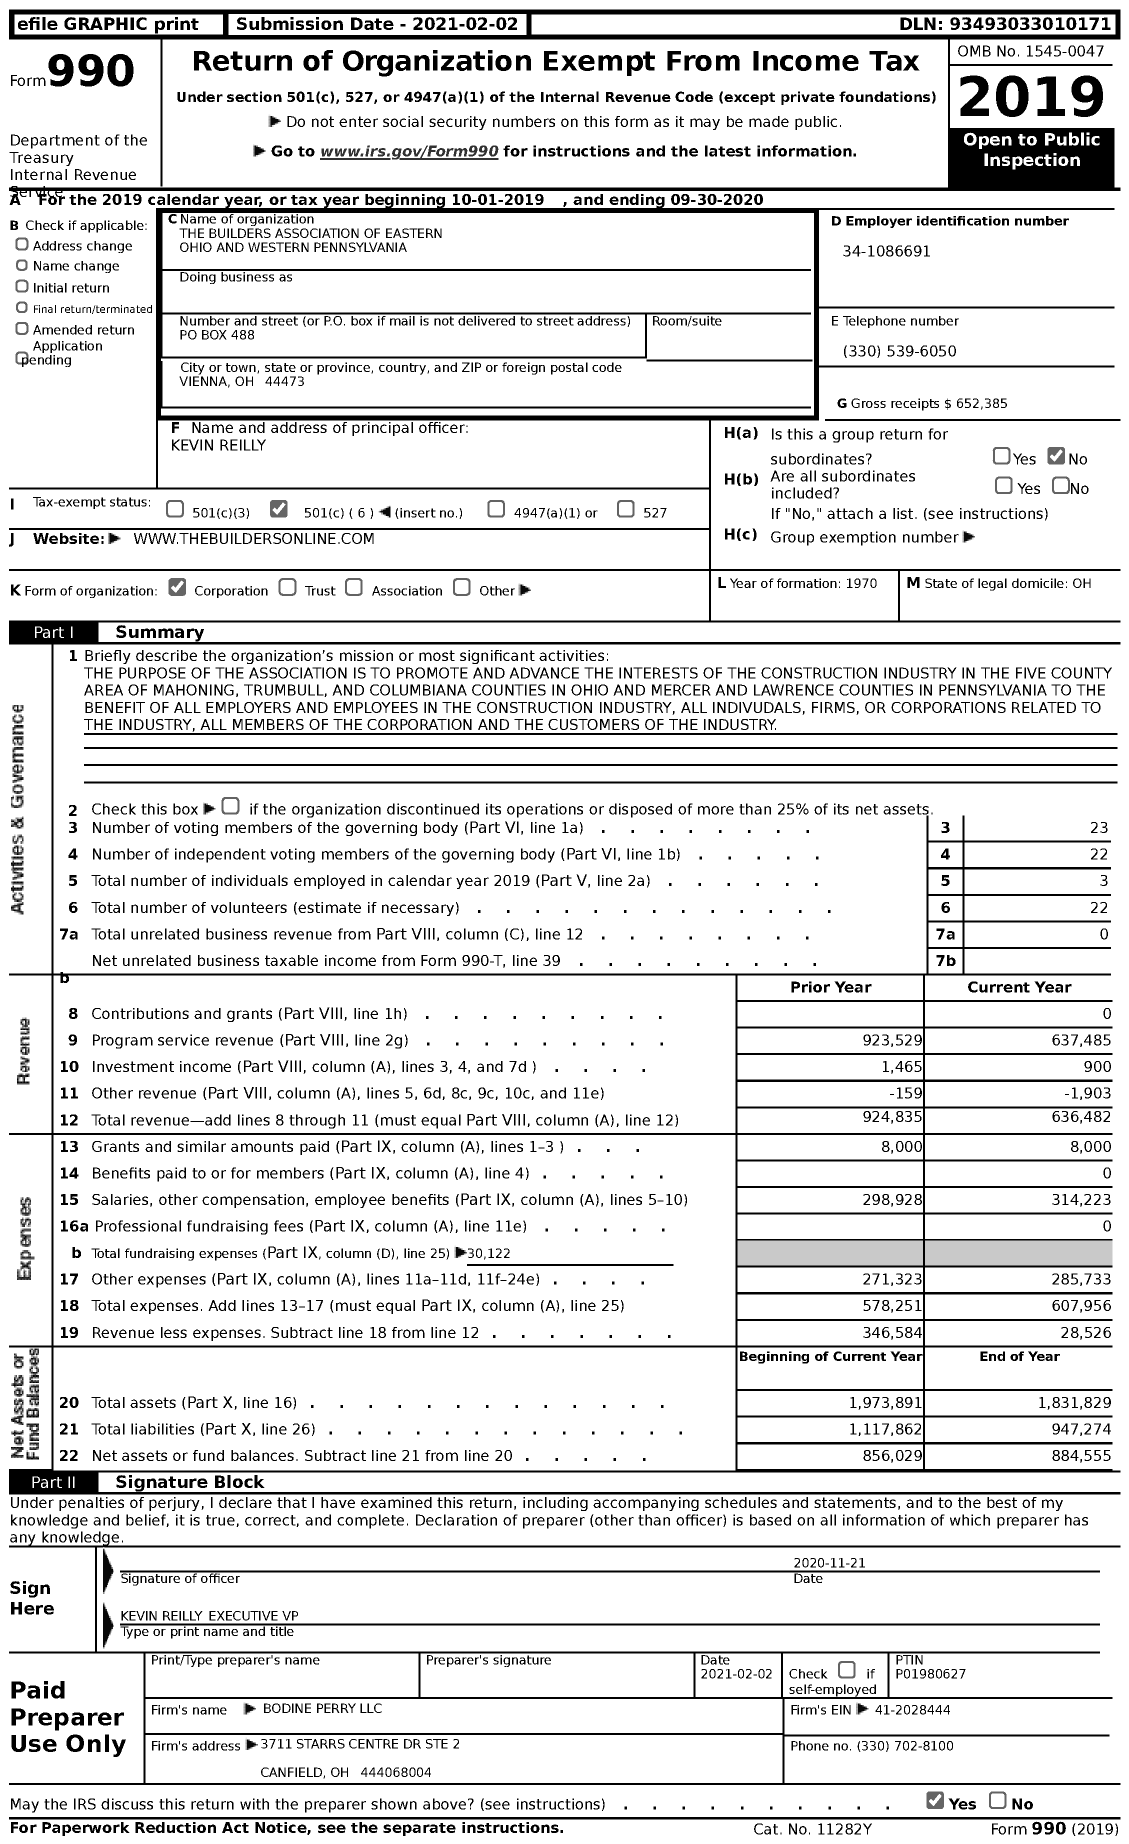 Image of first page of 2019 Form 990 for The Builders Association of Eastern Ohio and Western Pennsylvania